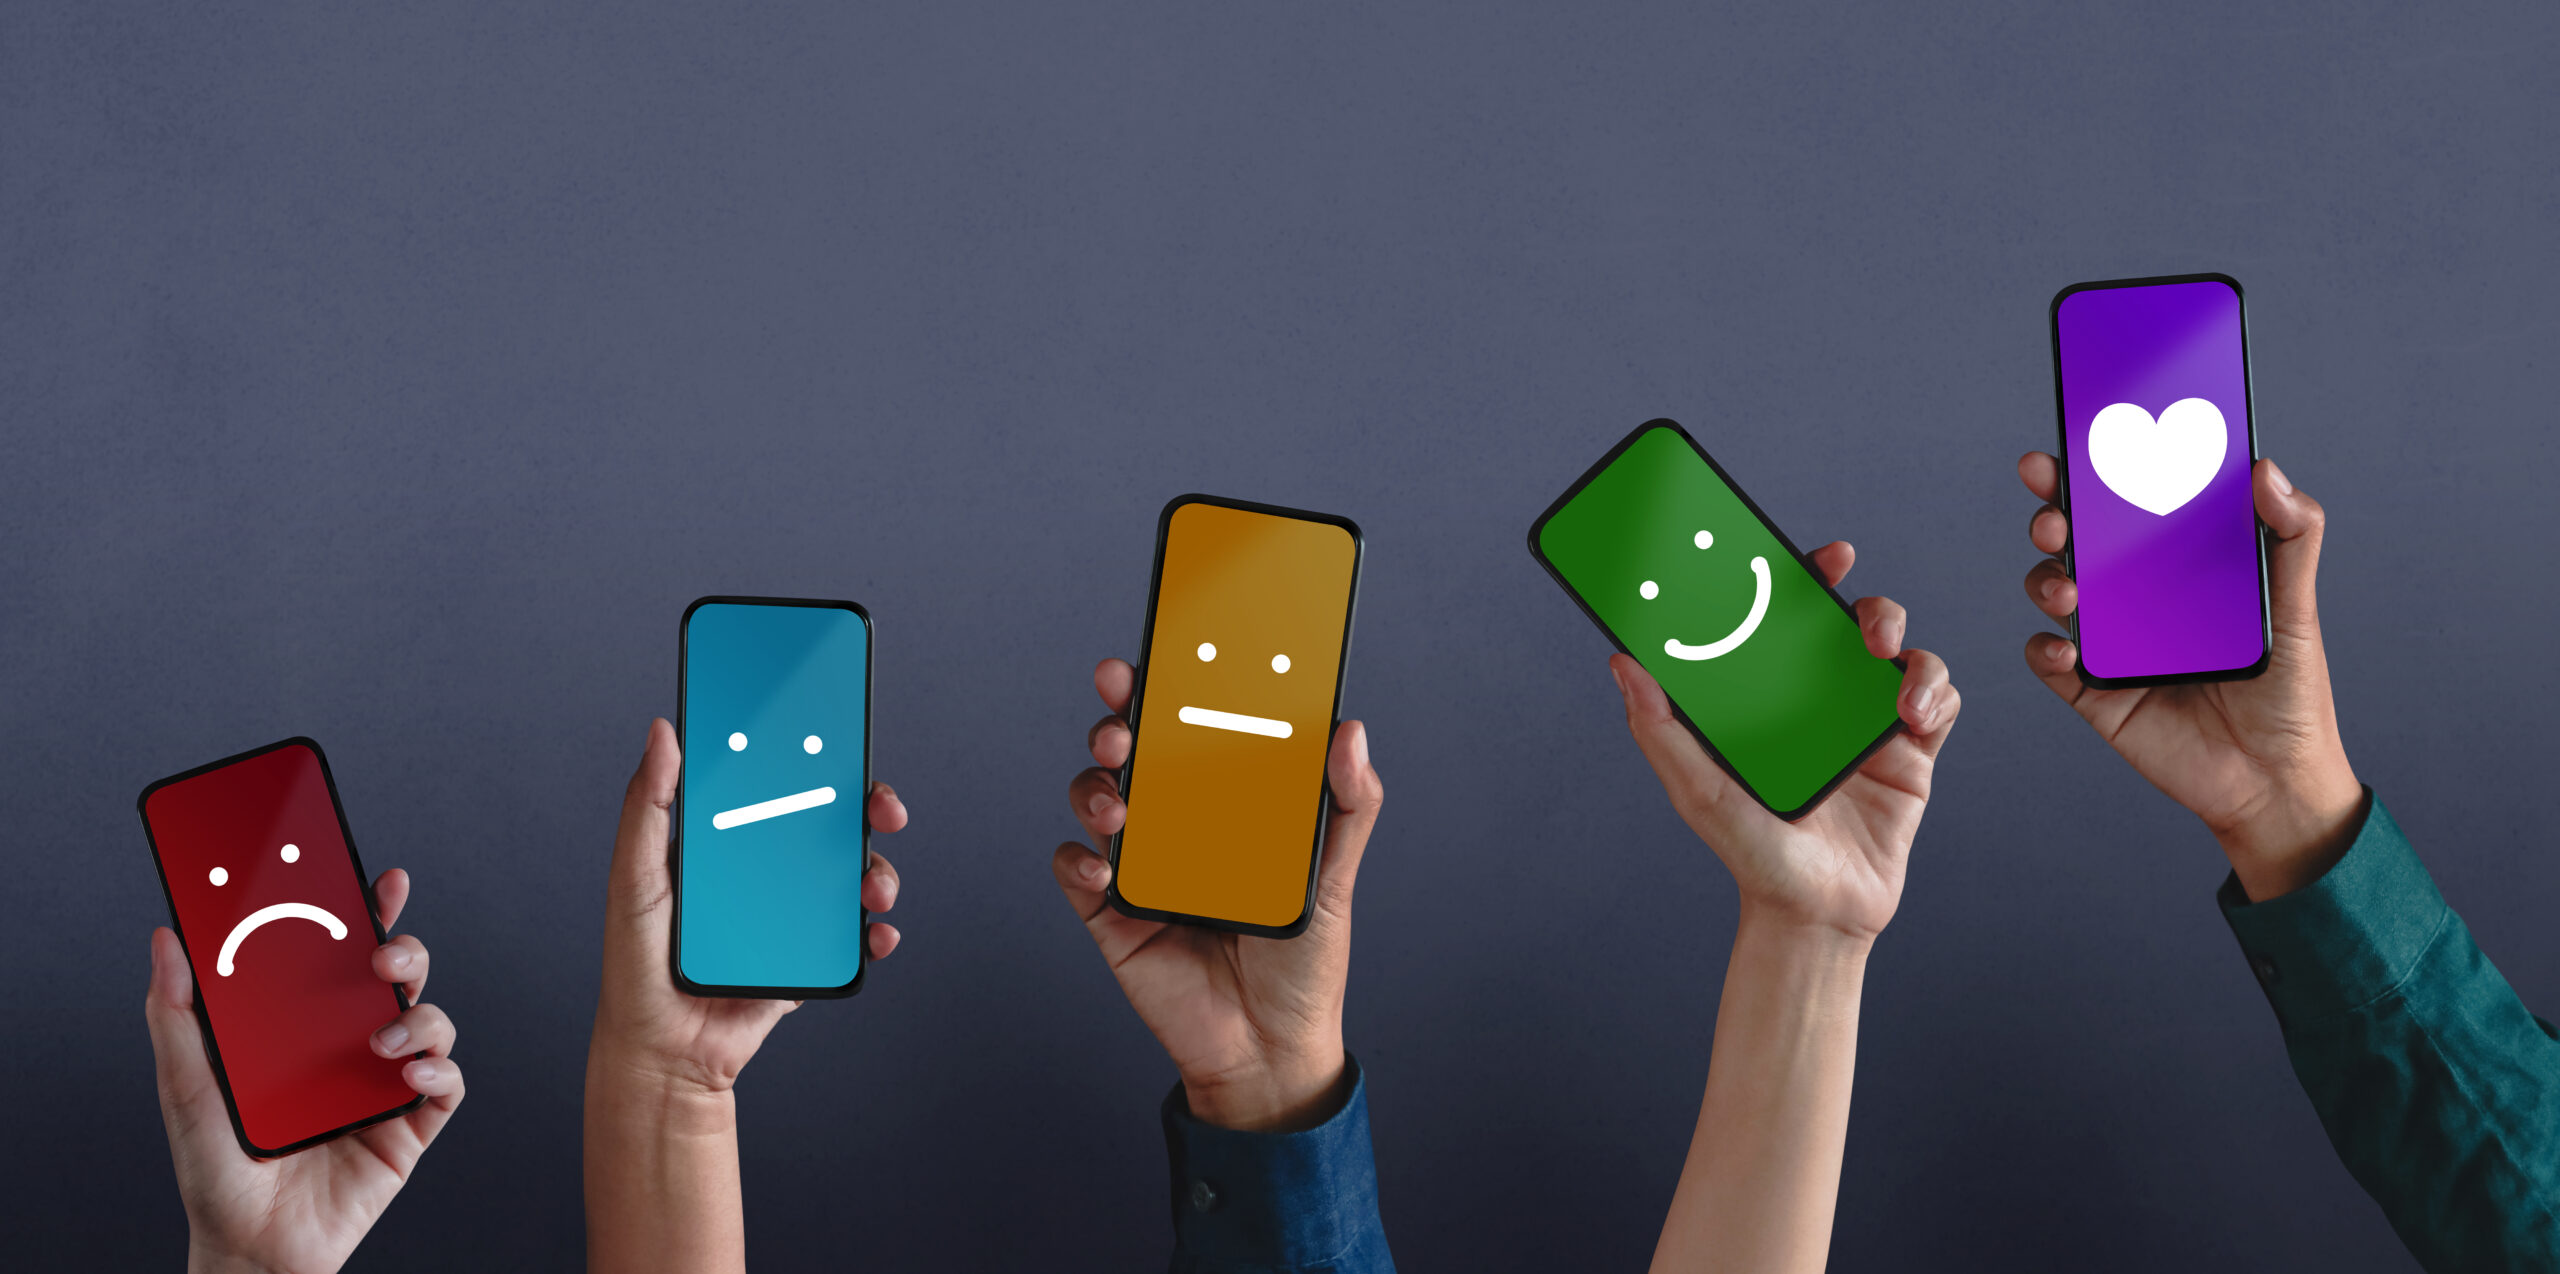 mobile devices held up by different people where the screens should different emoticons representing the experience of the user